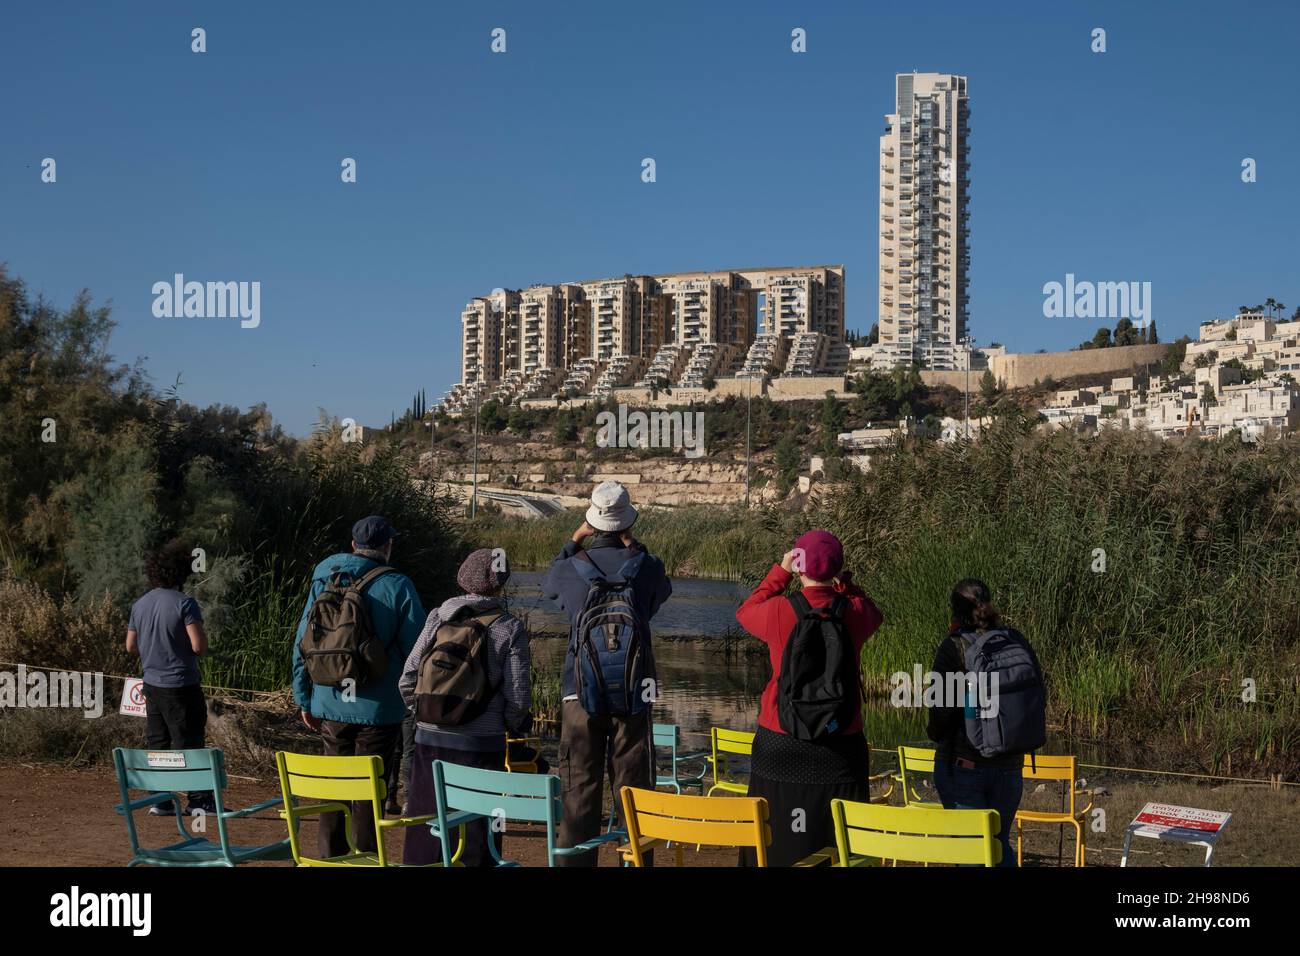 People watch a variety of wildlife in their natural behavior at the Gazelle Valley described as Israel’s first urban nature reserve named for a herd of gazelles of the subspecies Gazella that live in this area located in the heart of Jerusalem, Israel Stock Photo